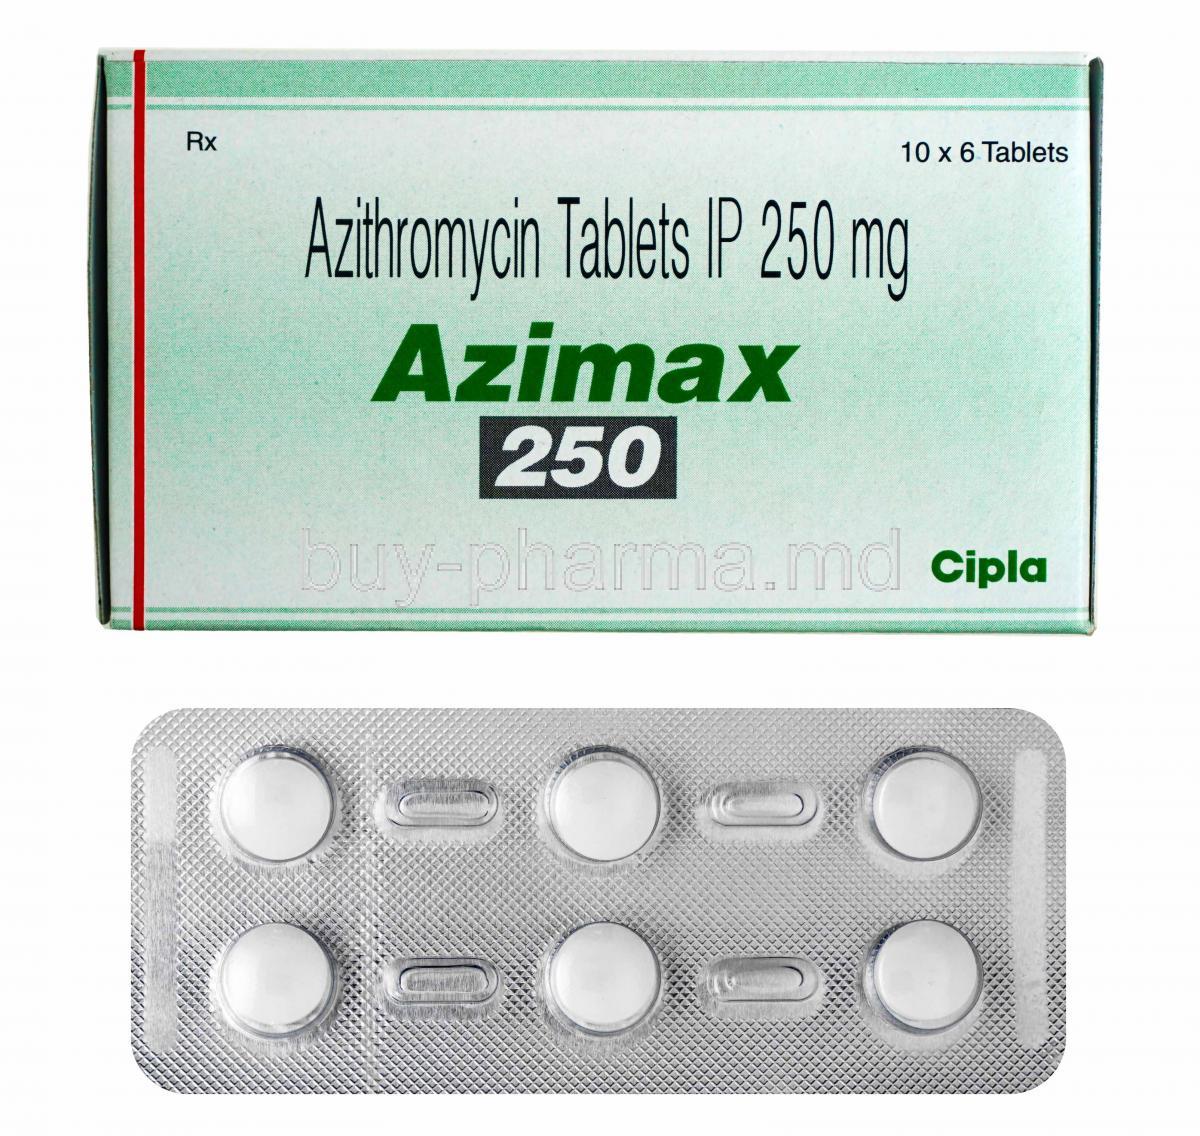 Azimax, Azithromycin 250mg box and tablets